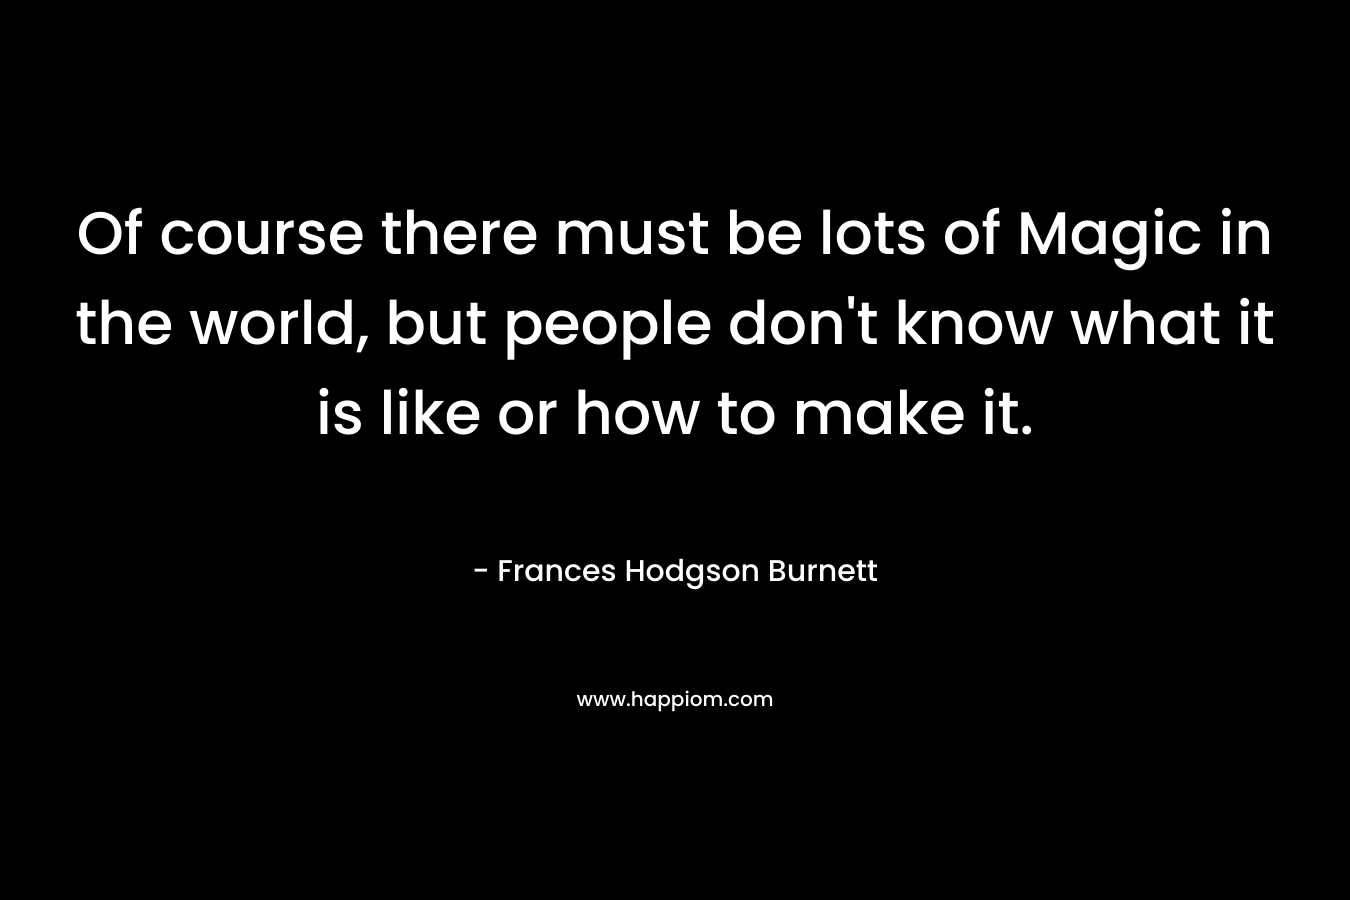 Of course there must be lots of Magic in the world, but people don’t know what it is like or how to make it. – Frances Hodgson Burnett